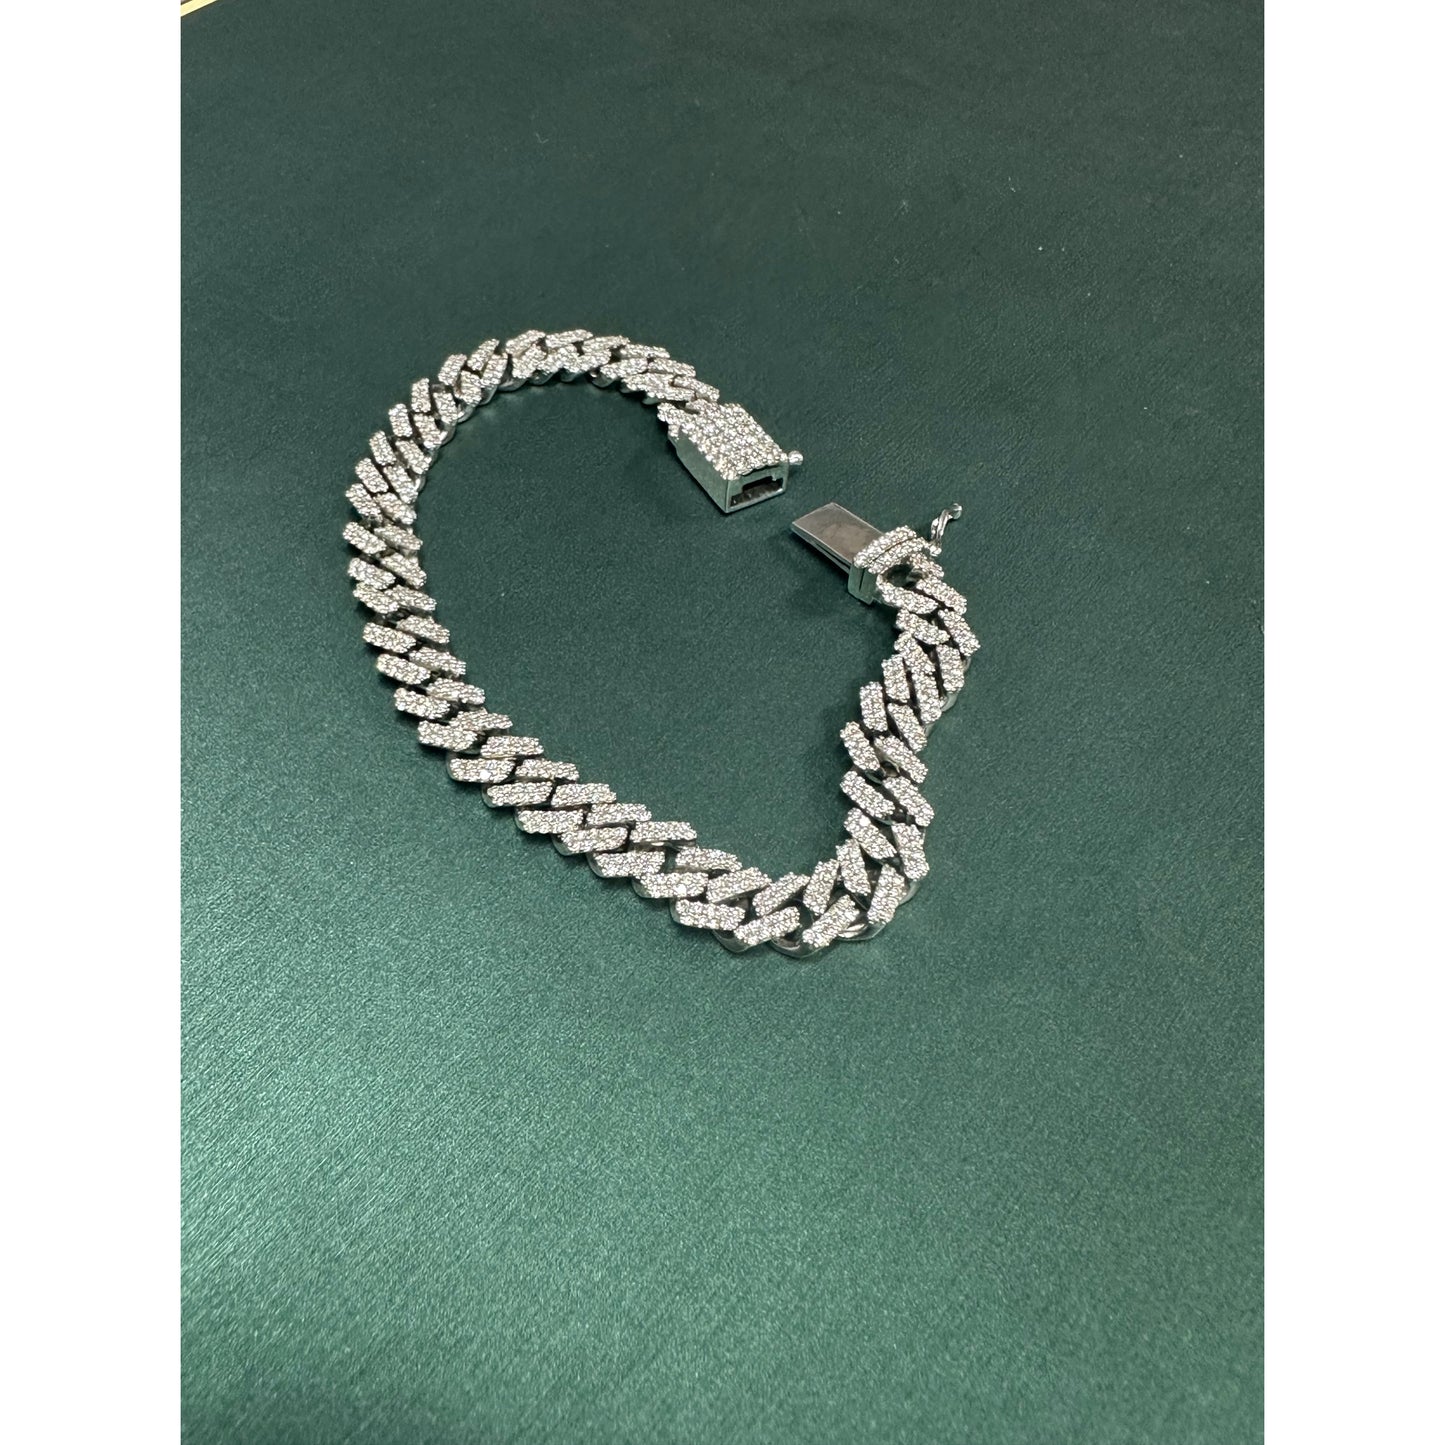 White gold cuban link z link style